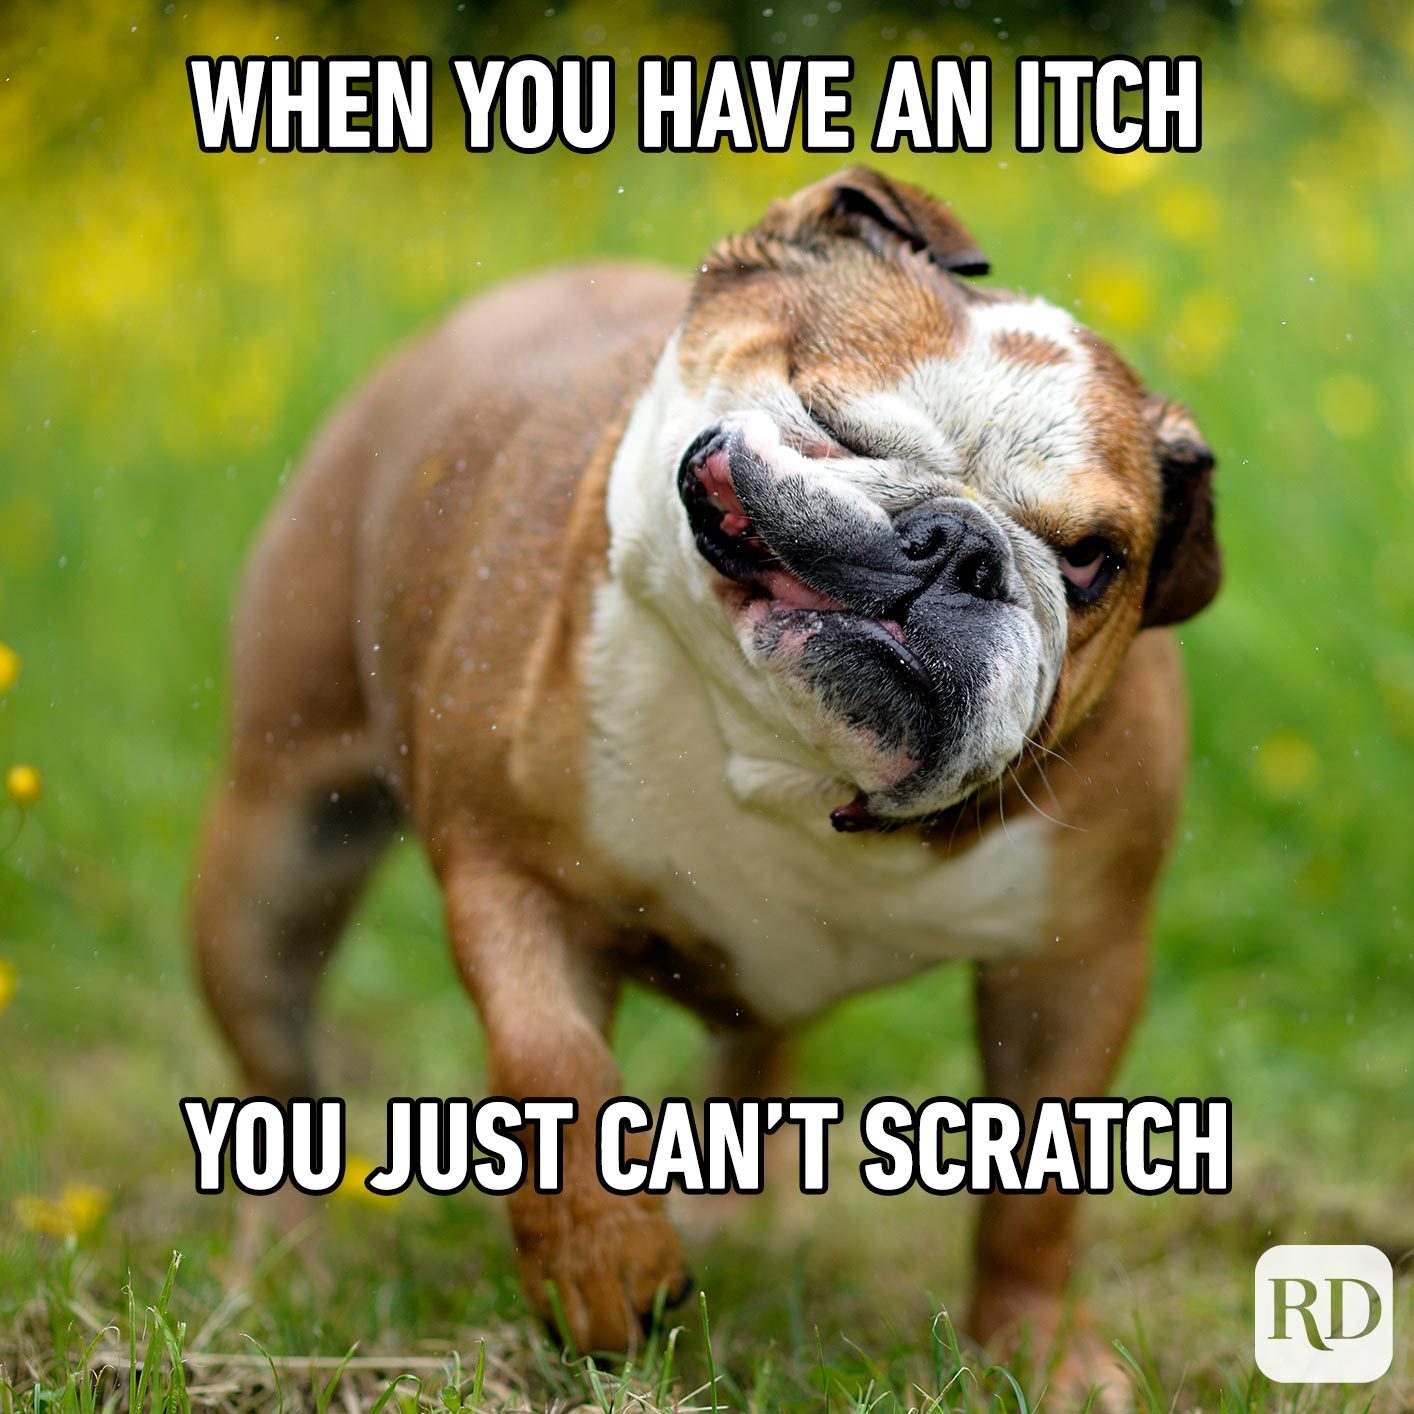 Dog swinging head around so that jaw flaps. Meme text: When you have an itch you just can't scratch